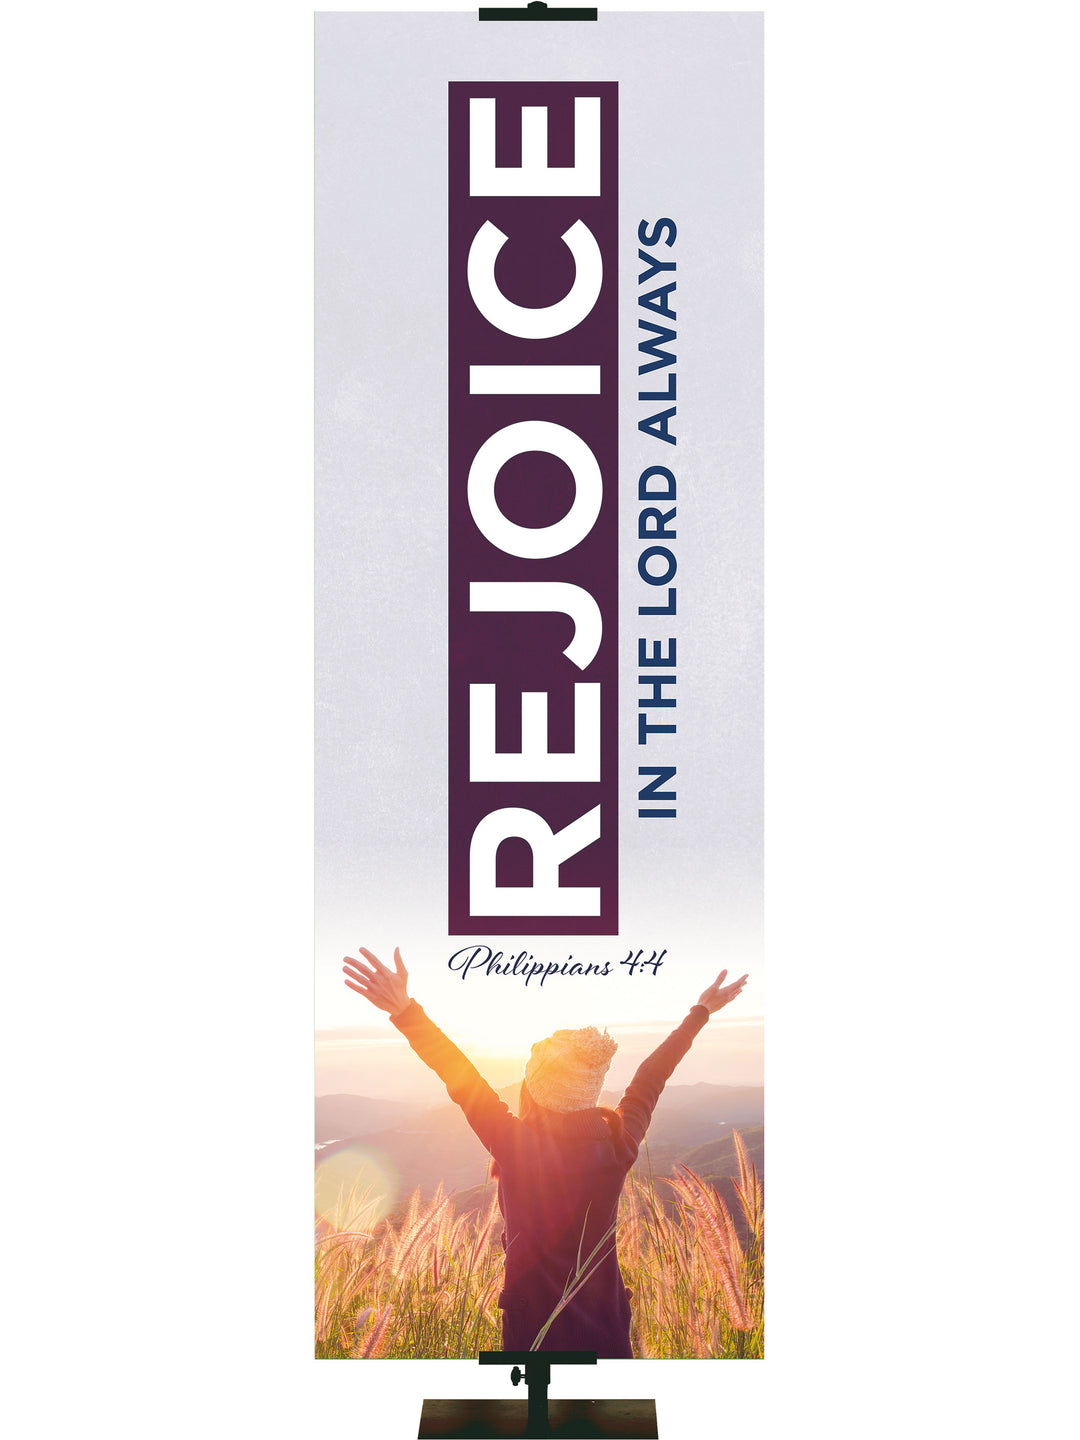 Rejoice In The Lord Always. Philippians 4:4 Church Banner with joyful arms reaching up from highland field